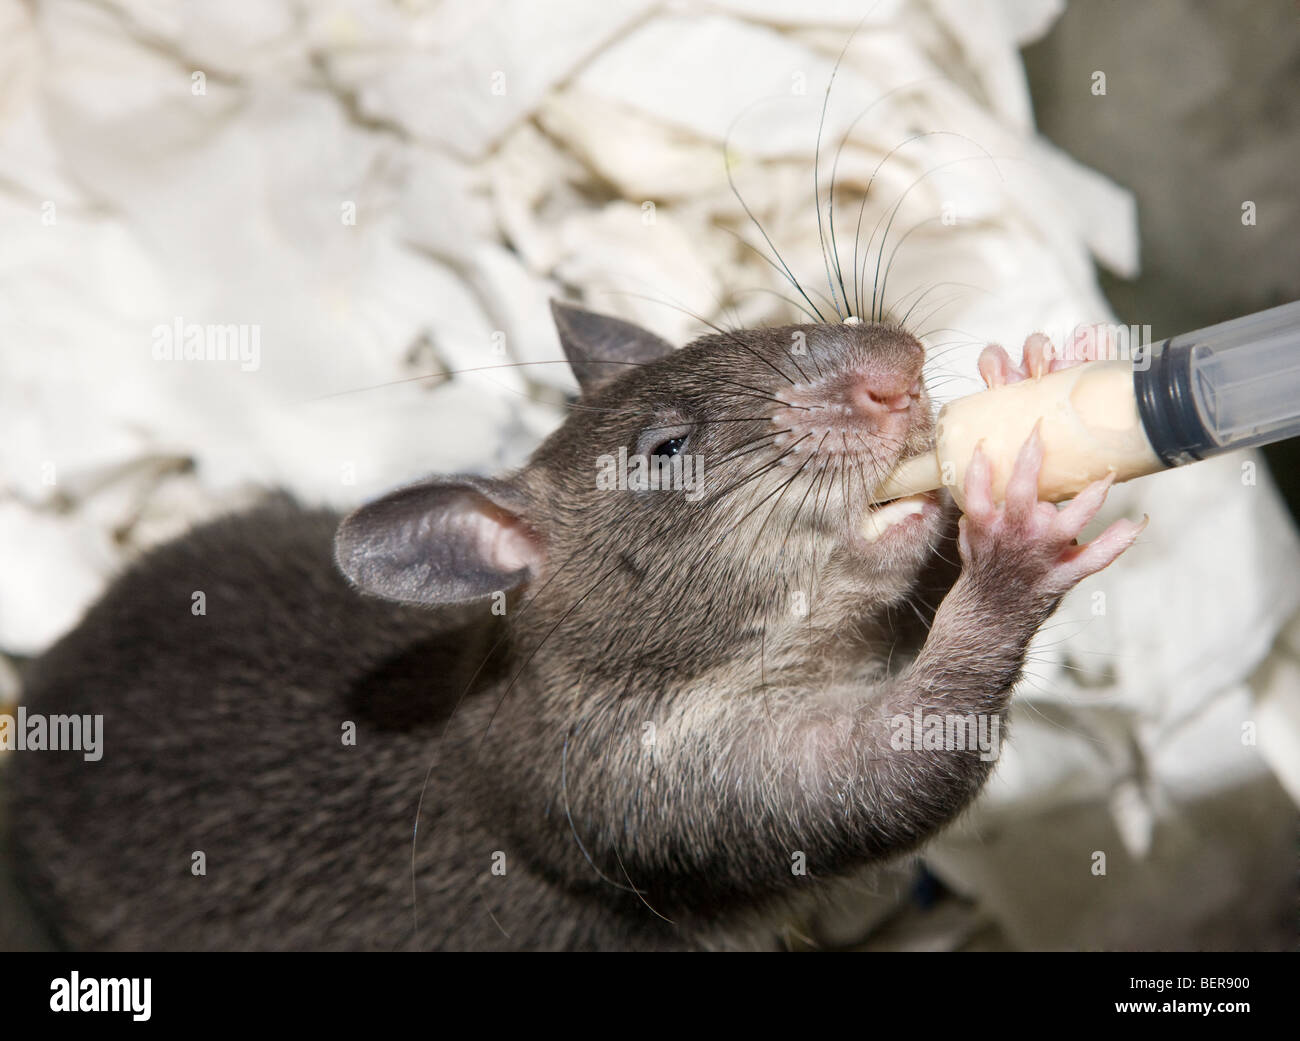 Gambian Pouched Ratte Cricetomys gambianus Stockfoto